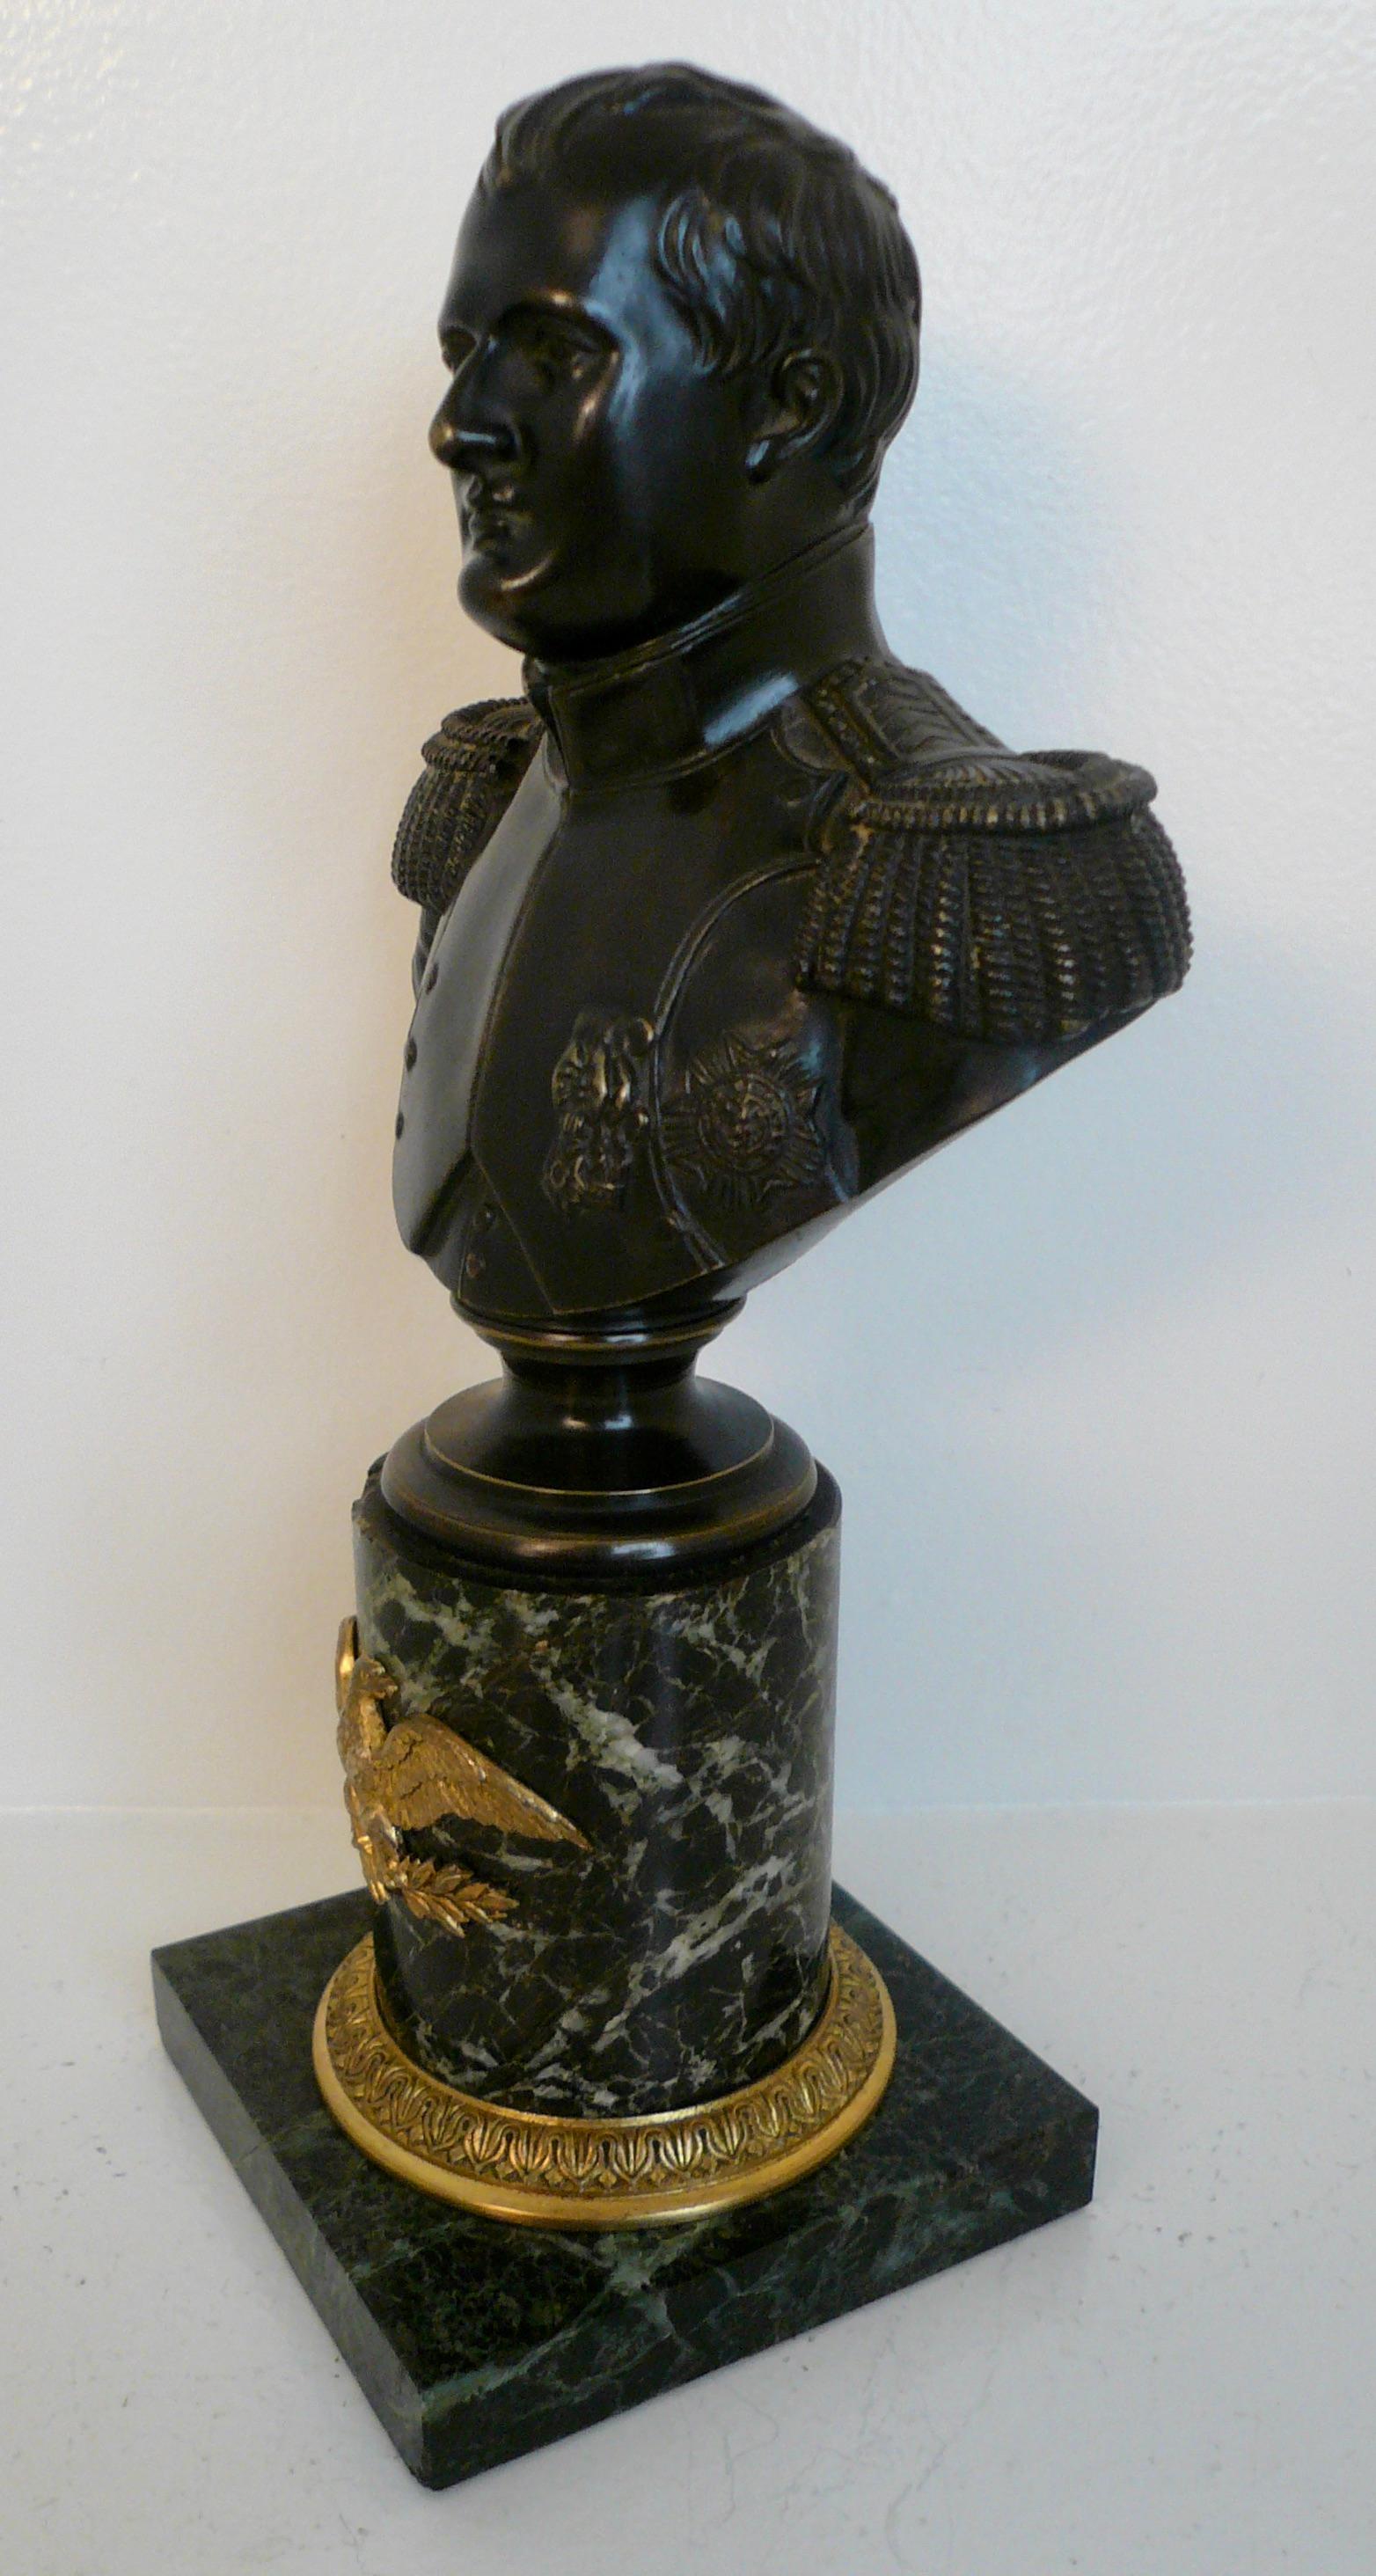 This finely detailed bronze bust of Napoleon features gilt bronze mounts on a verde antique marble base.